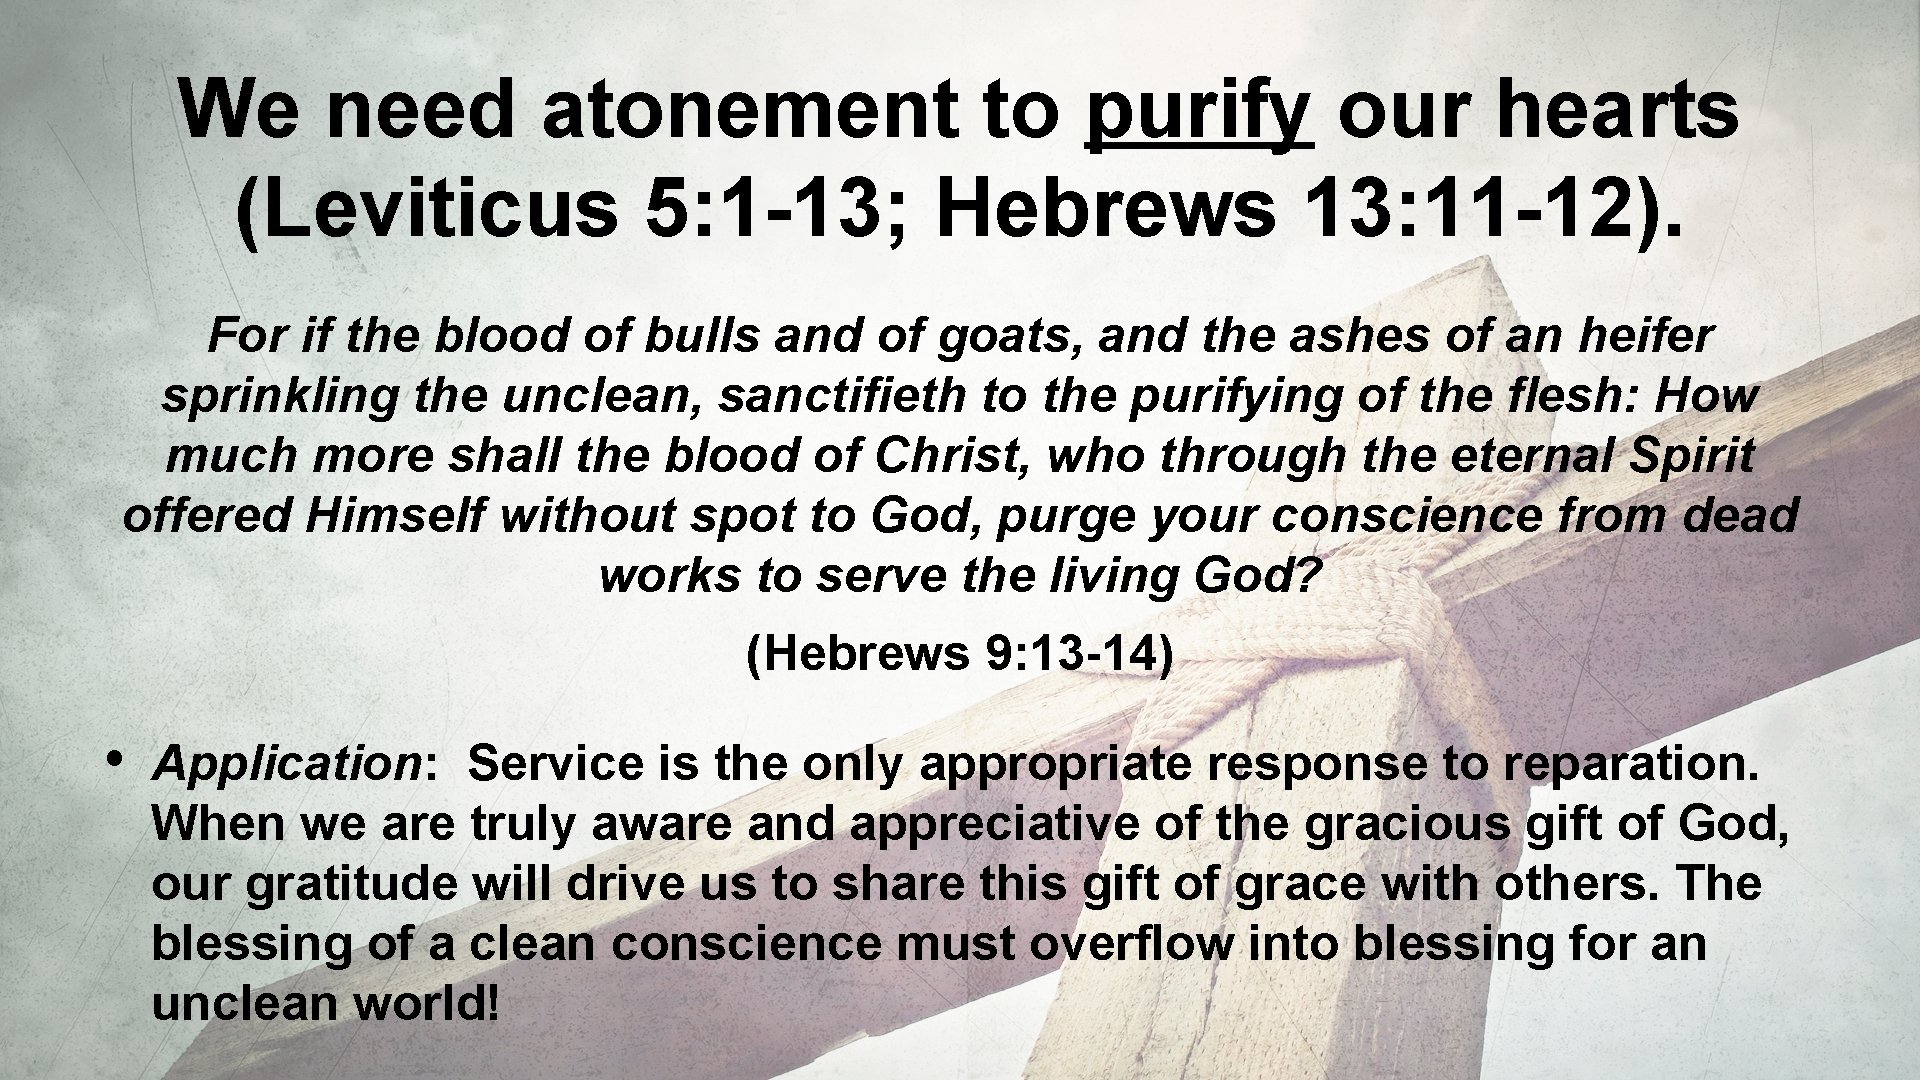 We need atonement to purify our hearts (Leviticus 5: 1 -13; Hebrews 13: 11